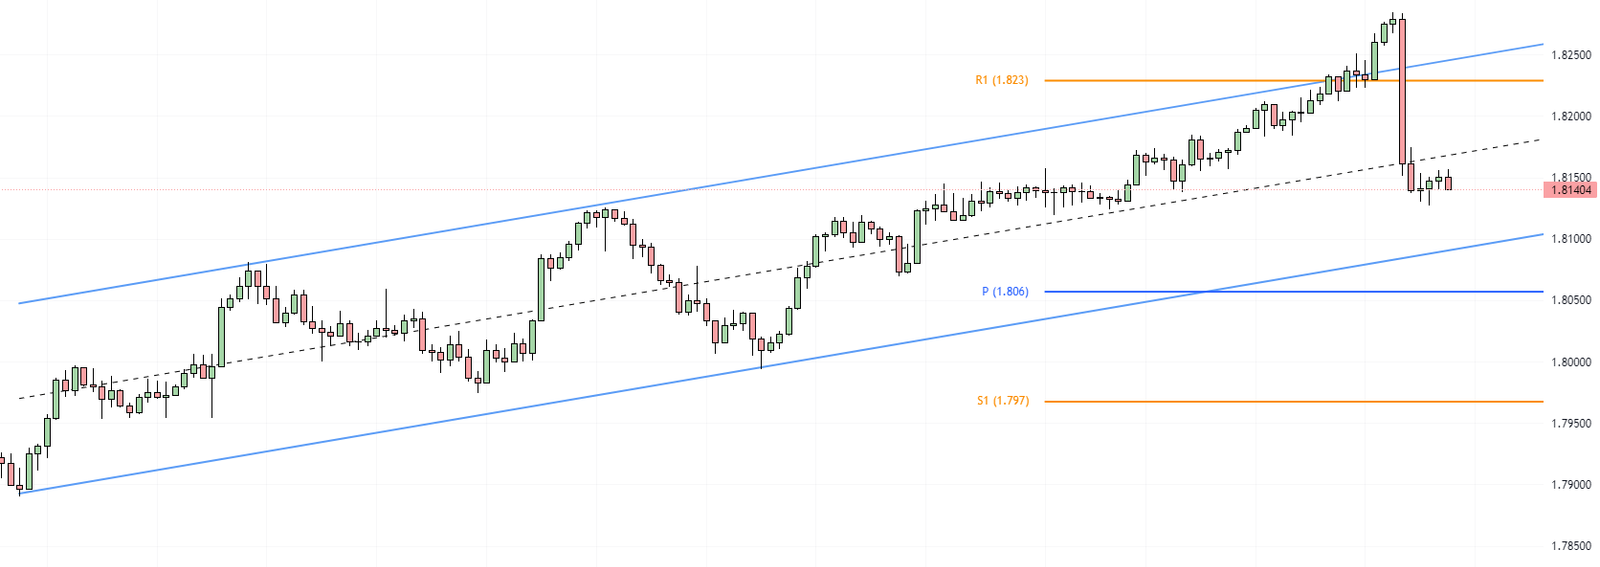 EURNZD Forecast - NZD Comes Back